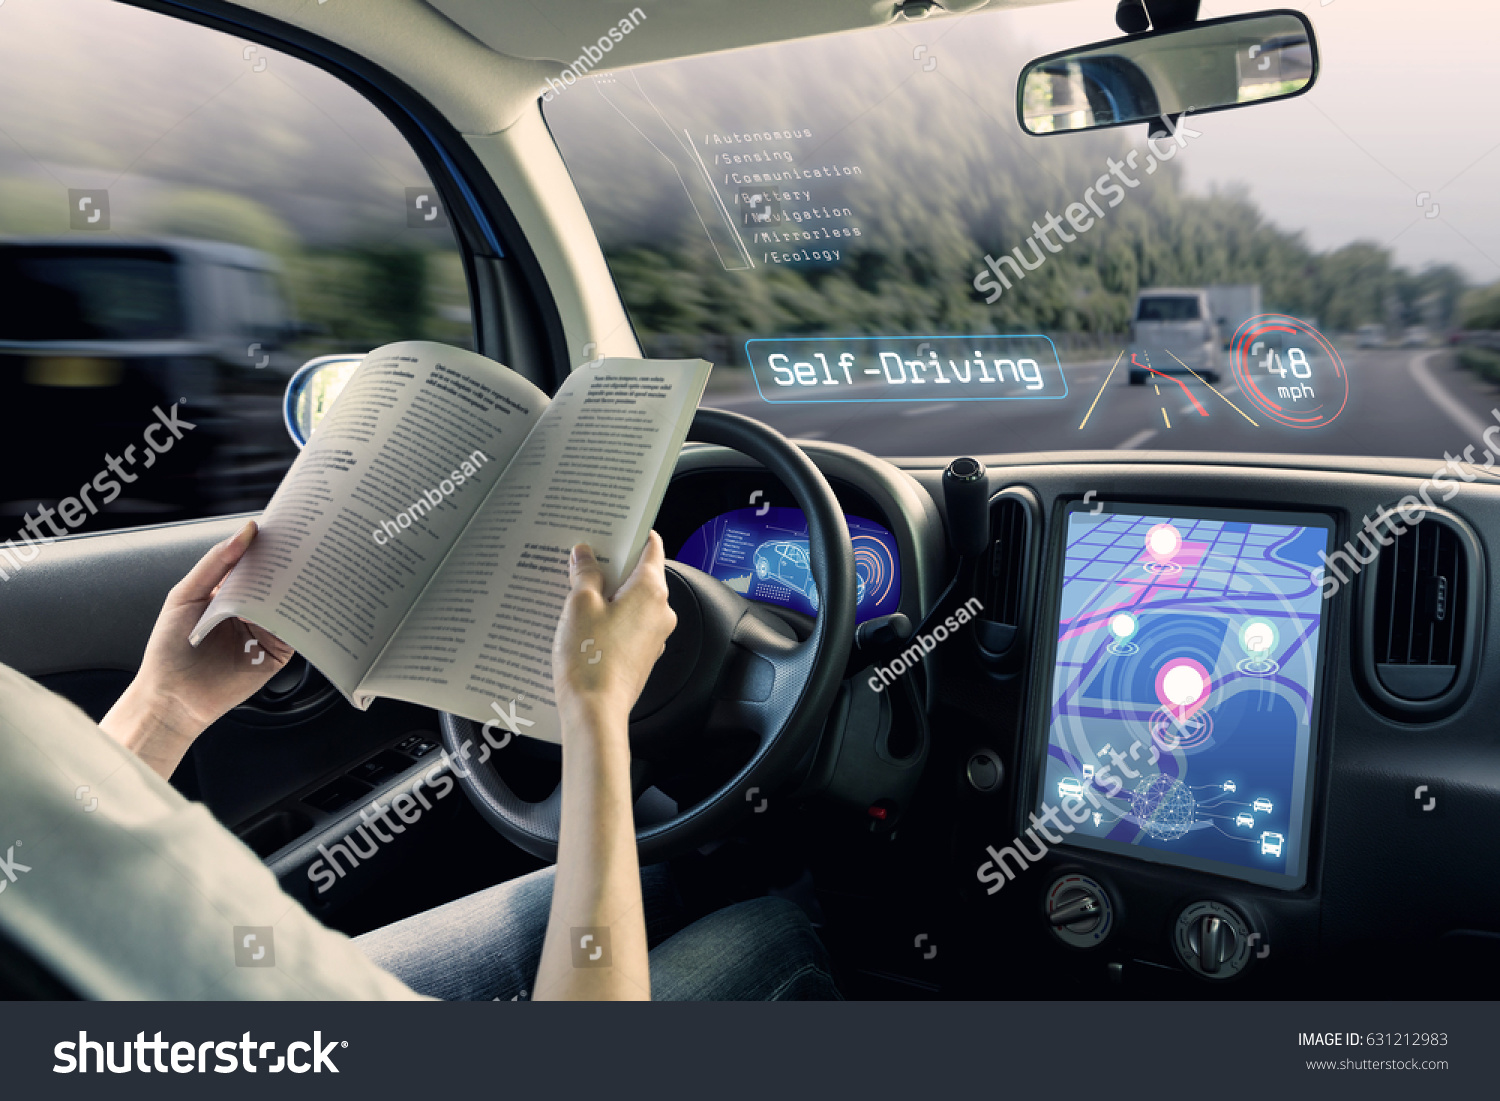 cockpit of autonomous car. a vehicle running self driving mode and a woman driver being relaxed. #631212983